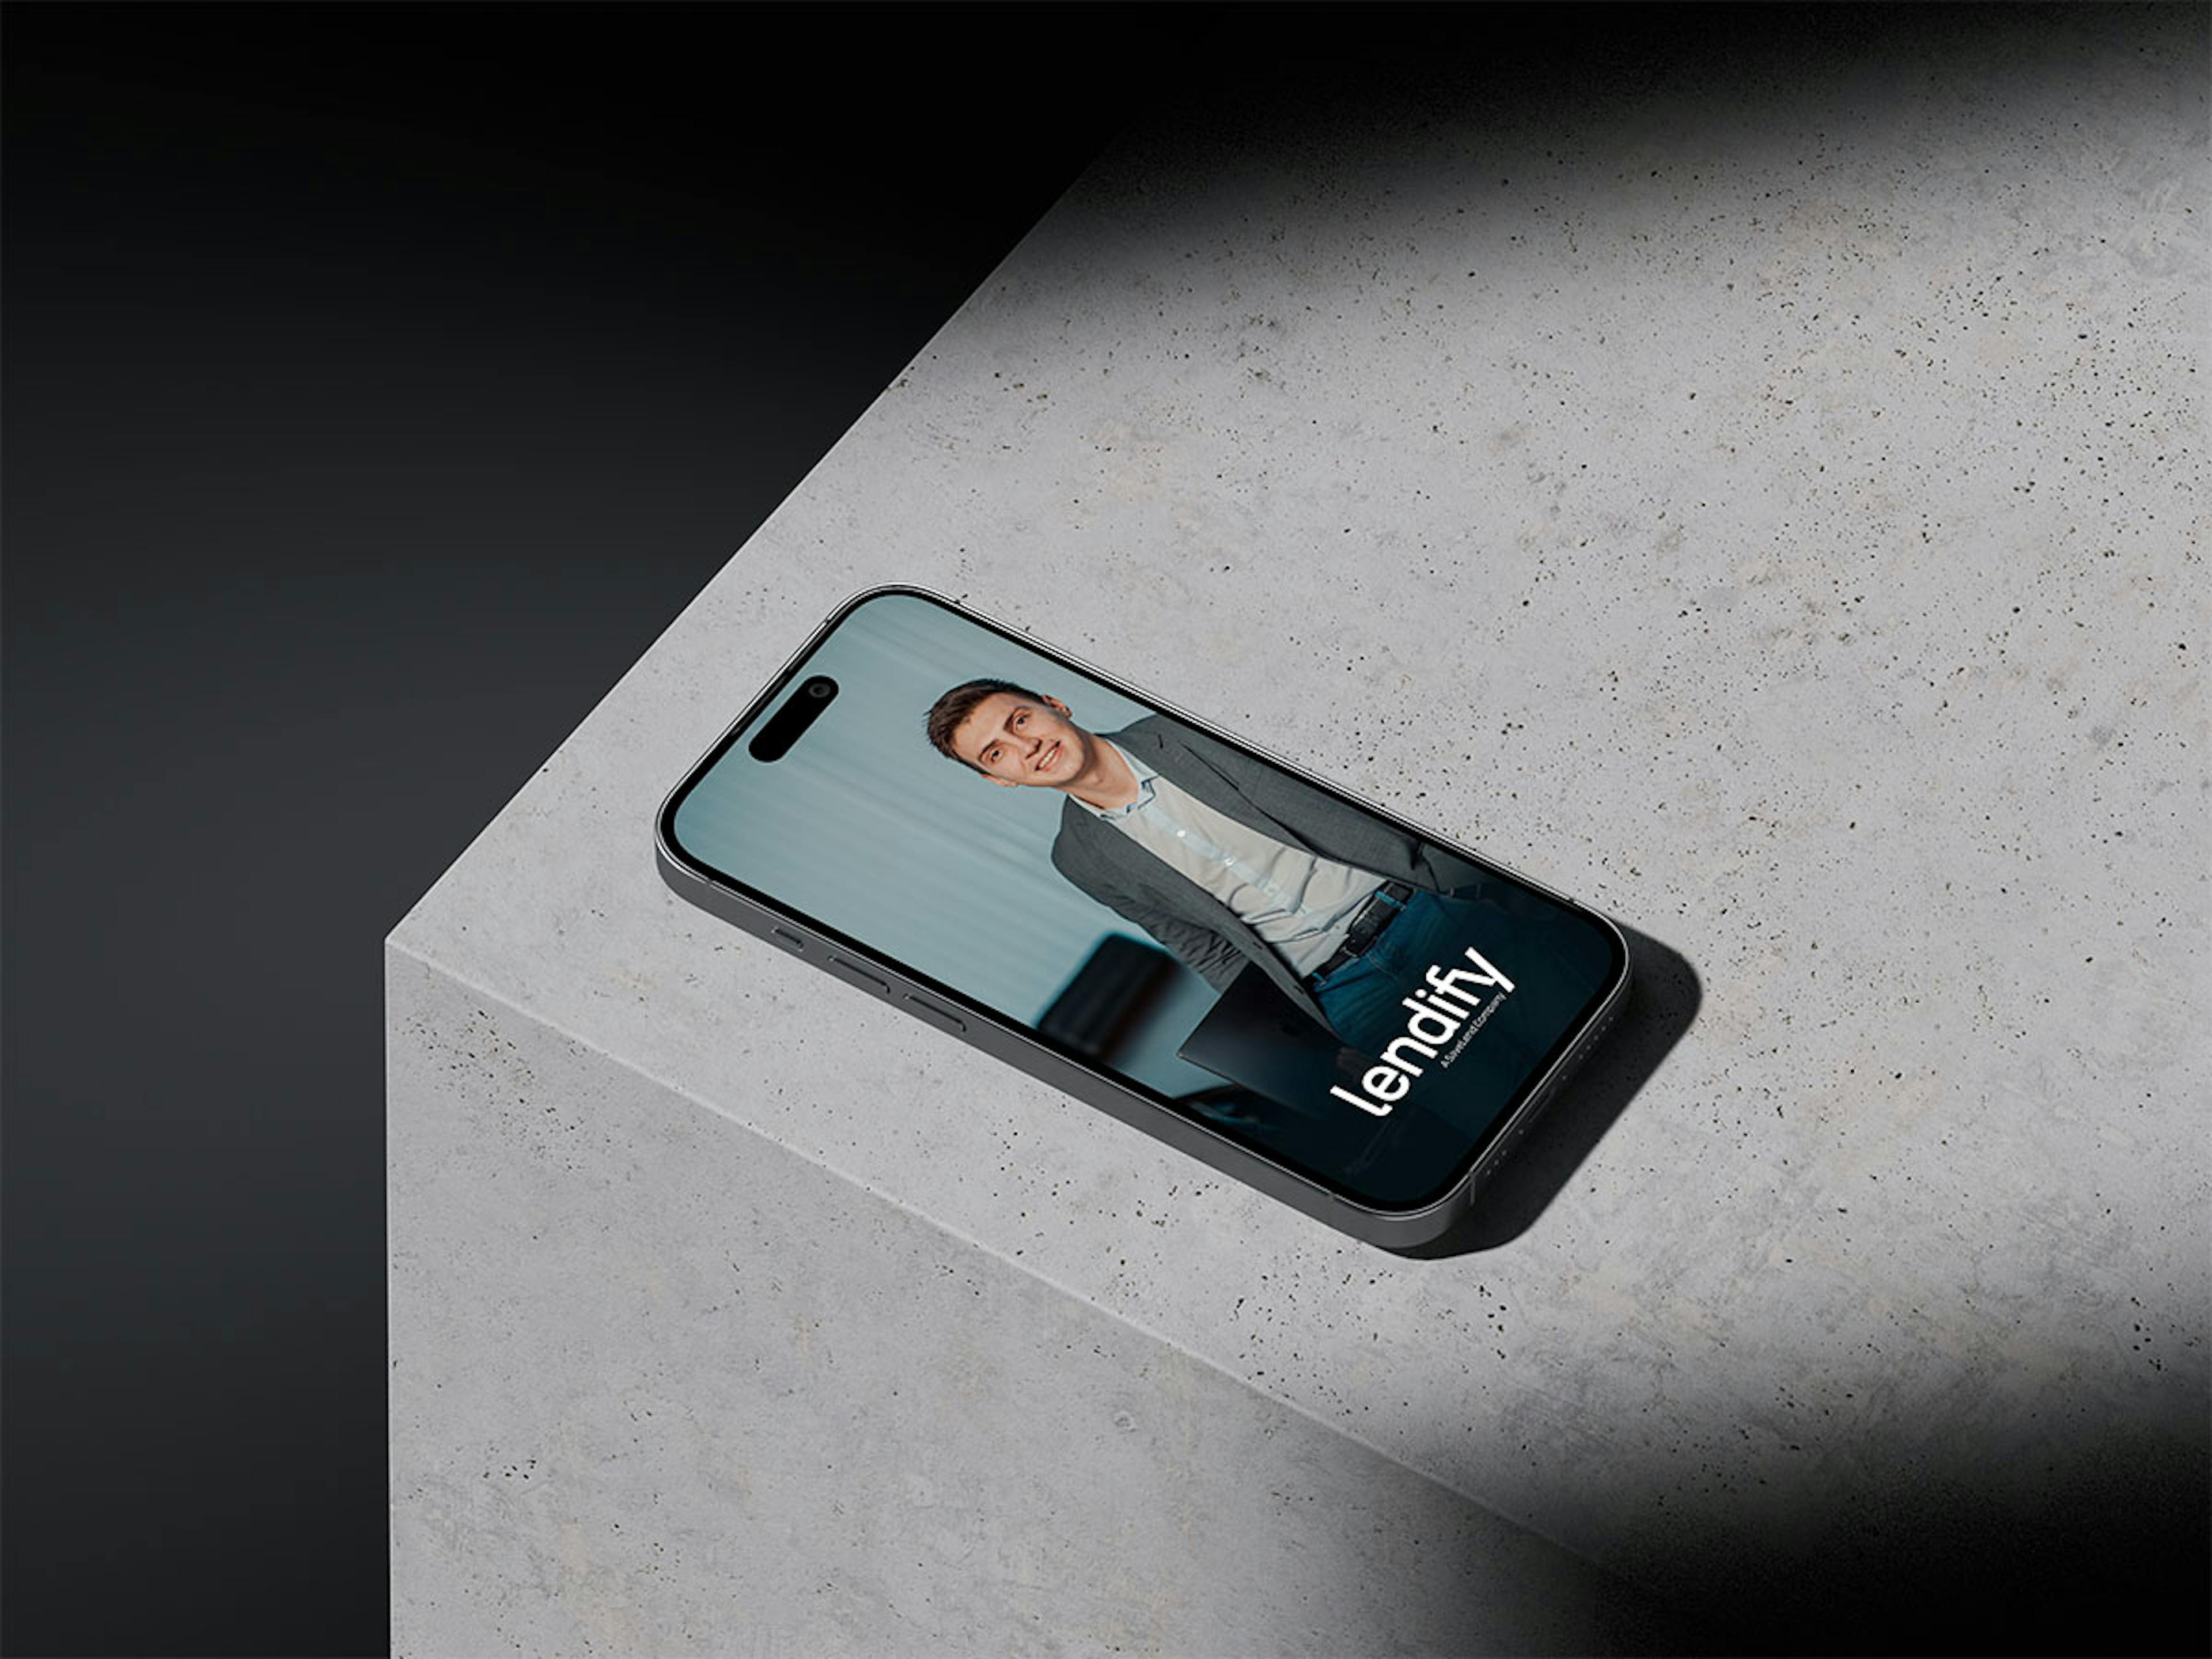 An iPhone sitting on a concrete surface displaying an Lendify ad